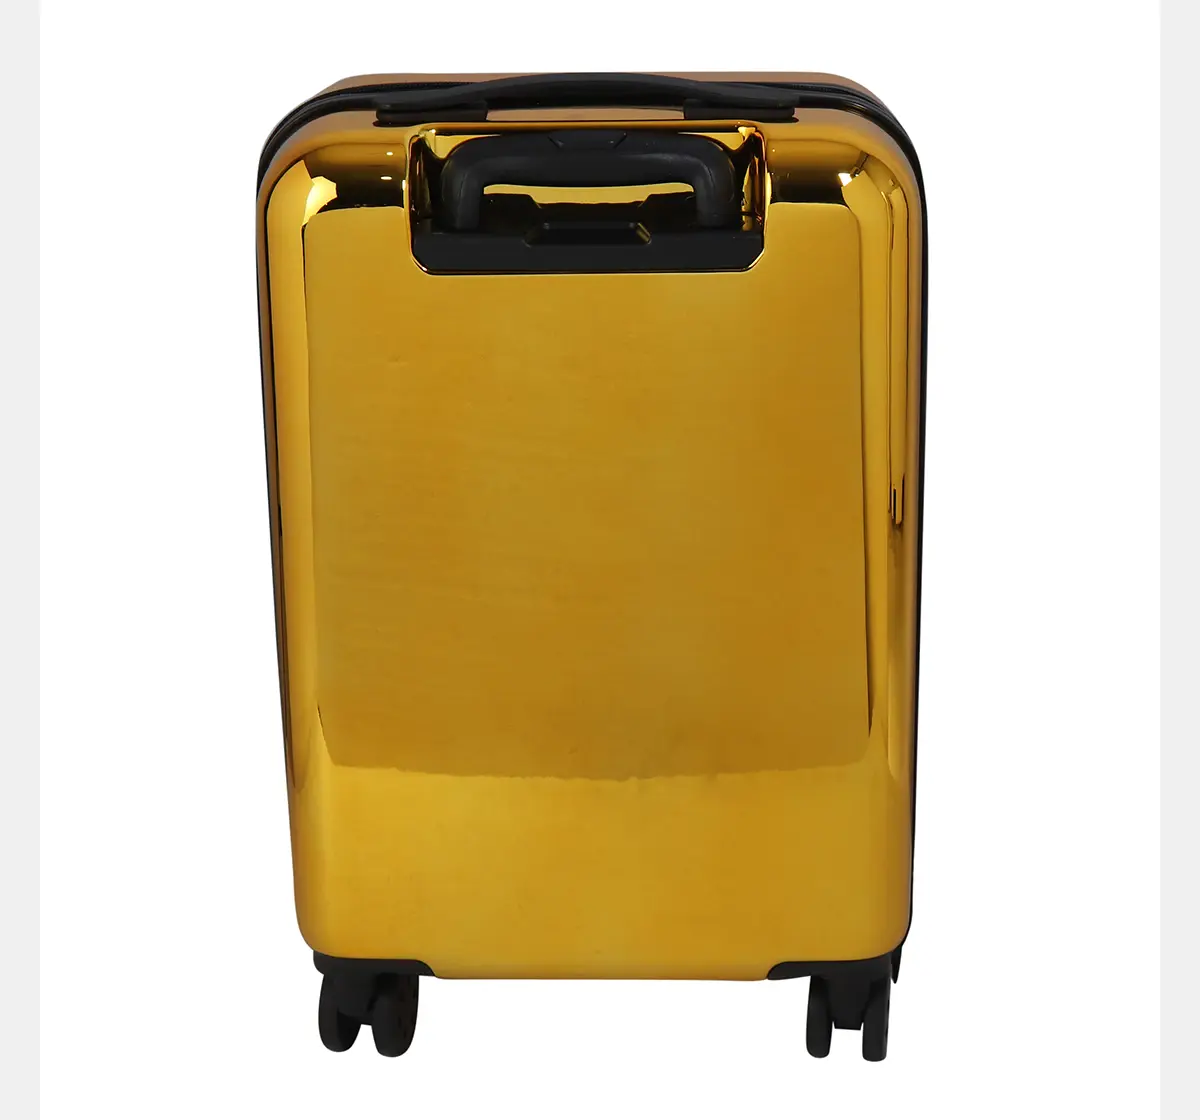 Hamster London Suitcase Gold, 12Y+